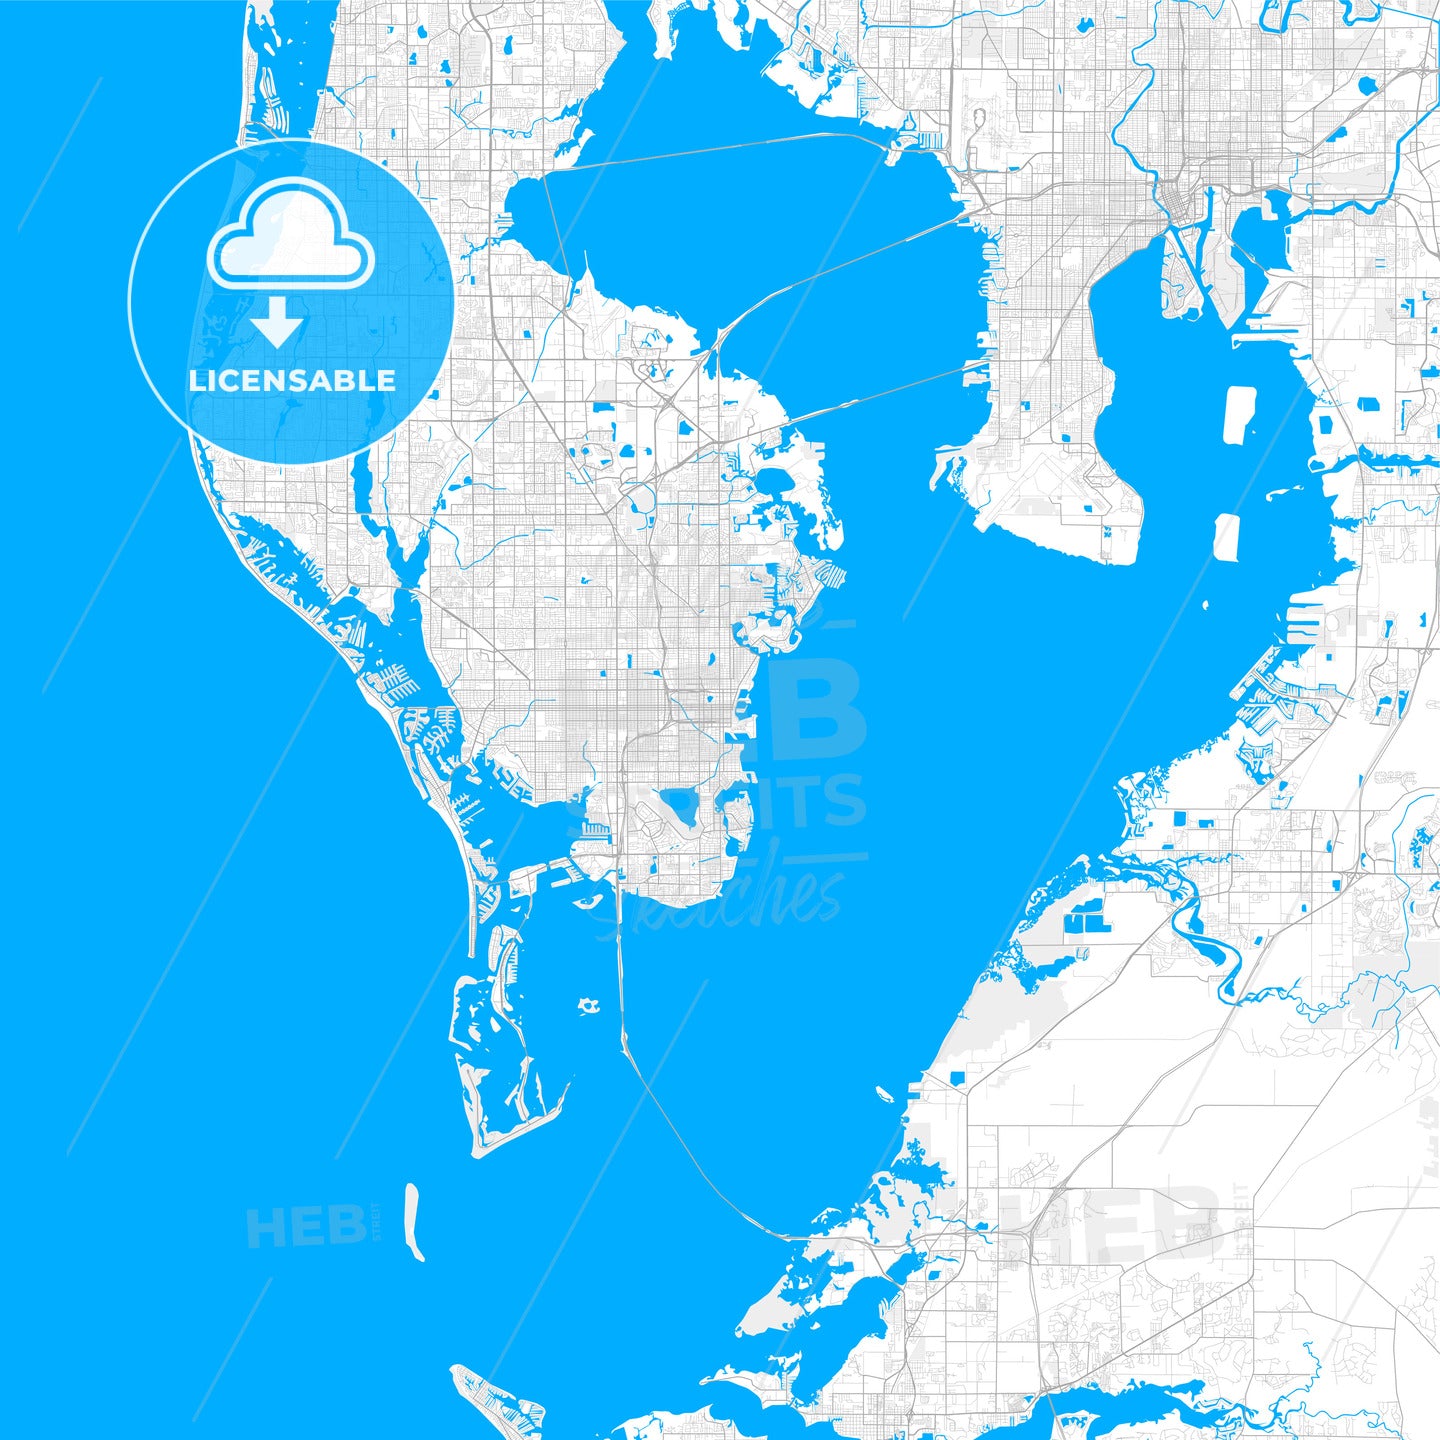 Rich detailed vector map of St. Petersburg, Florida, U.S.A.